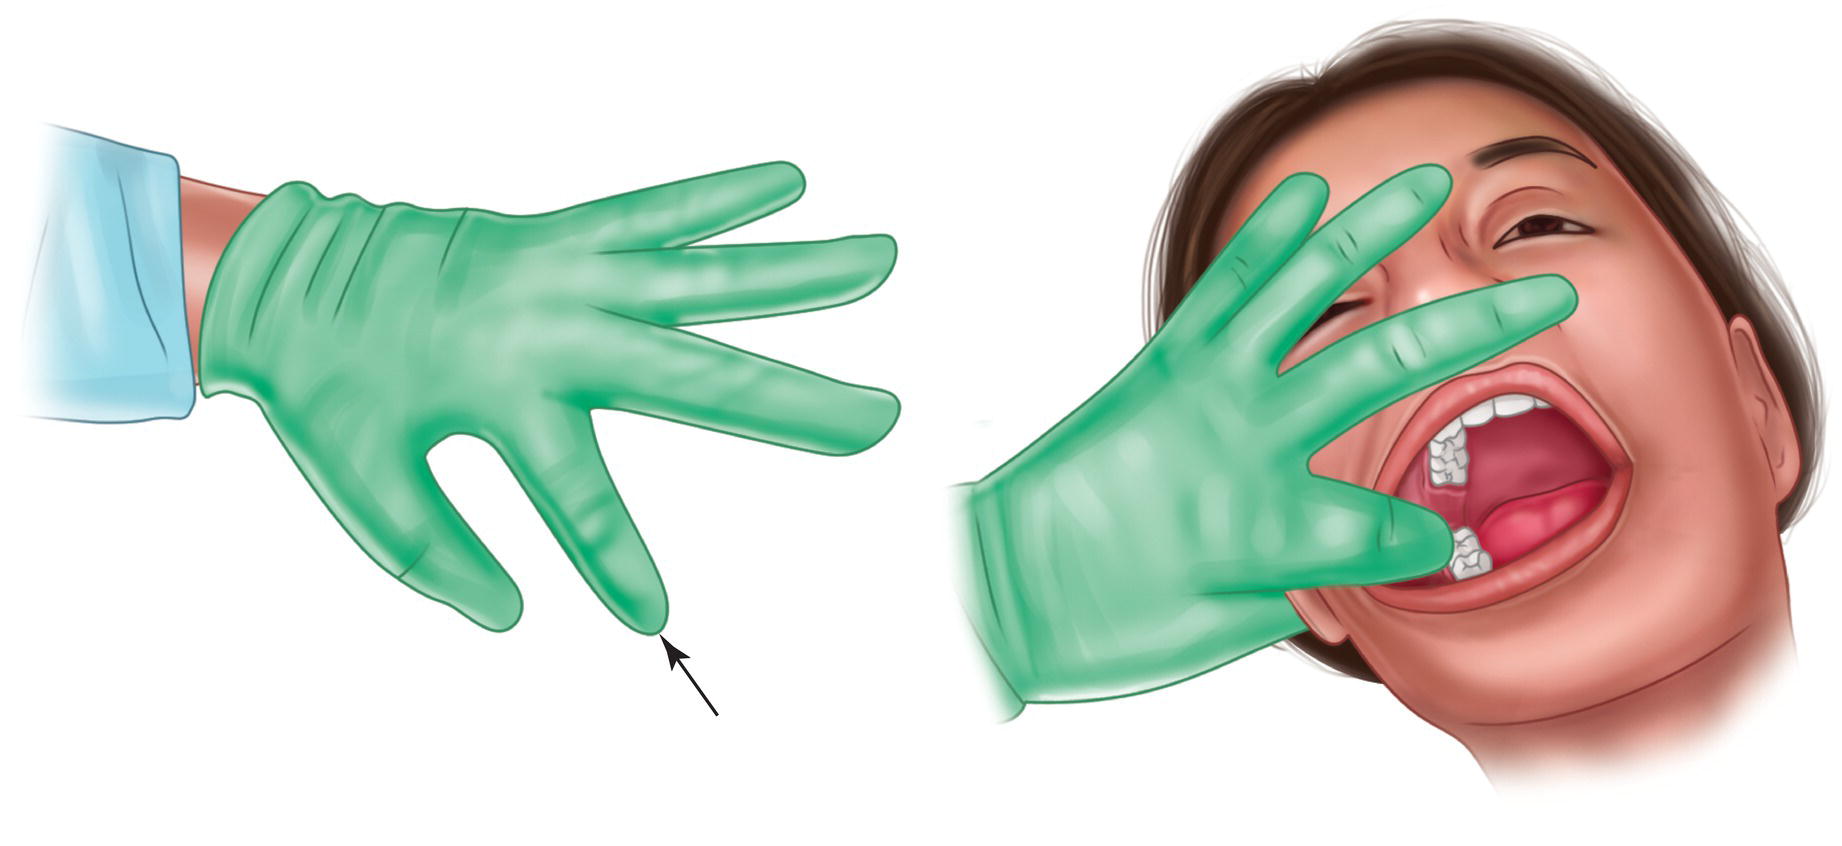 An illustration of bending the index finger and pulling the patient's cheek.